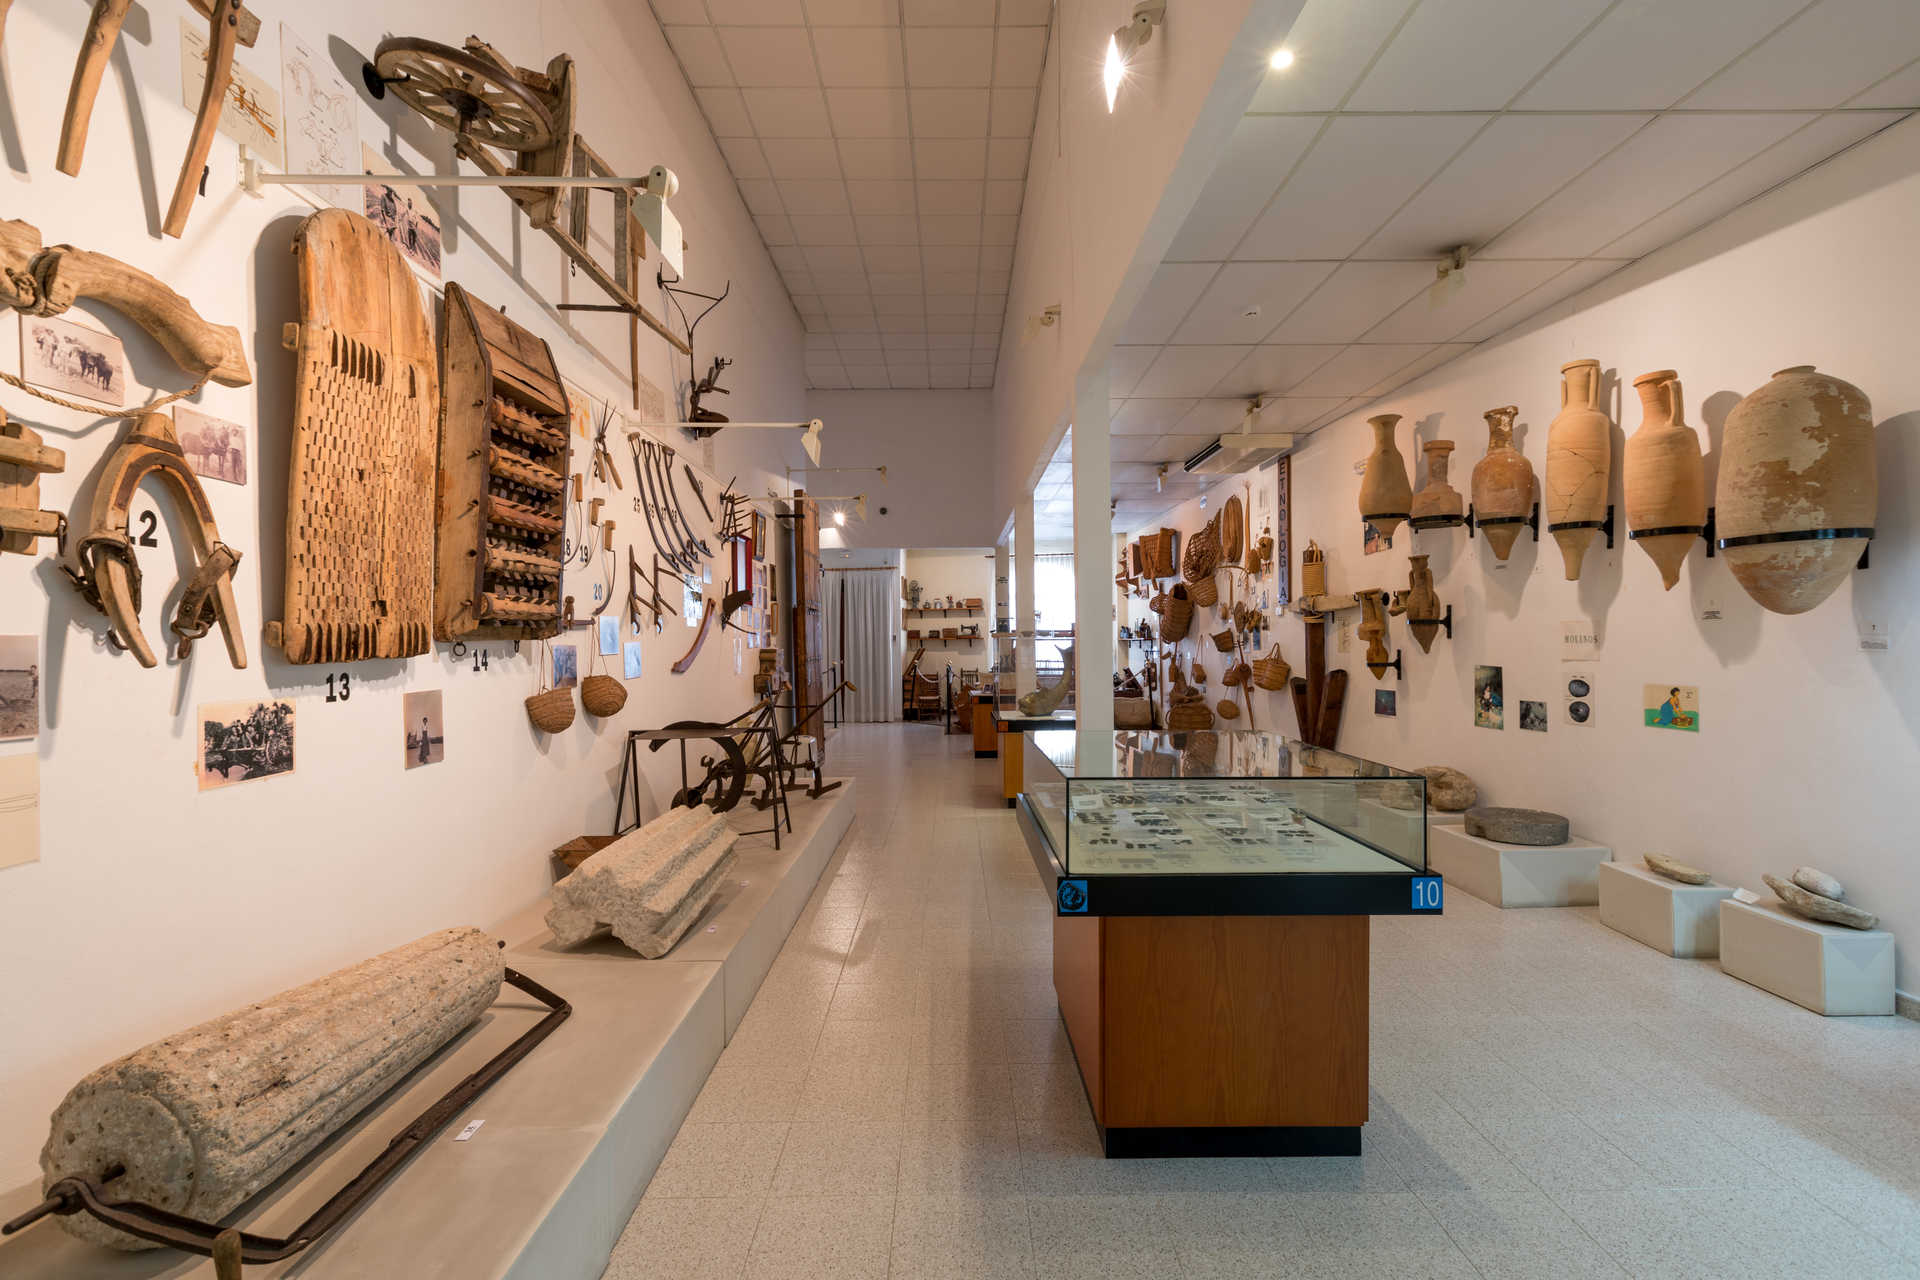 Archaeological- Ethnological Museum